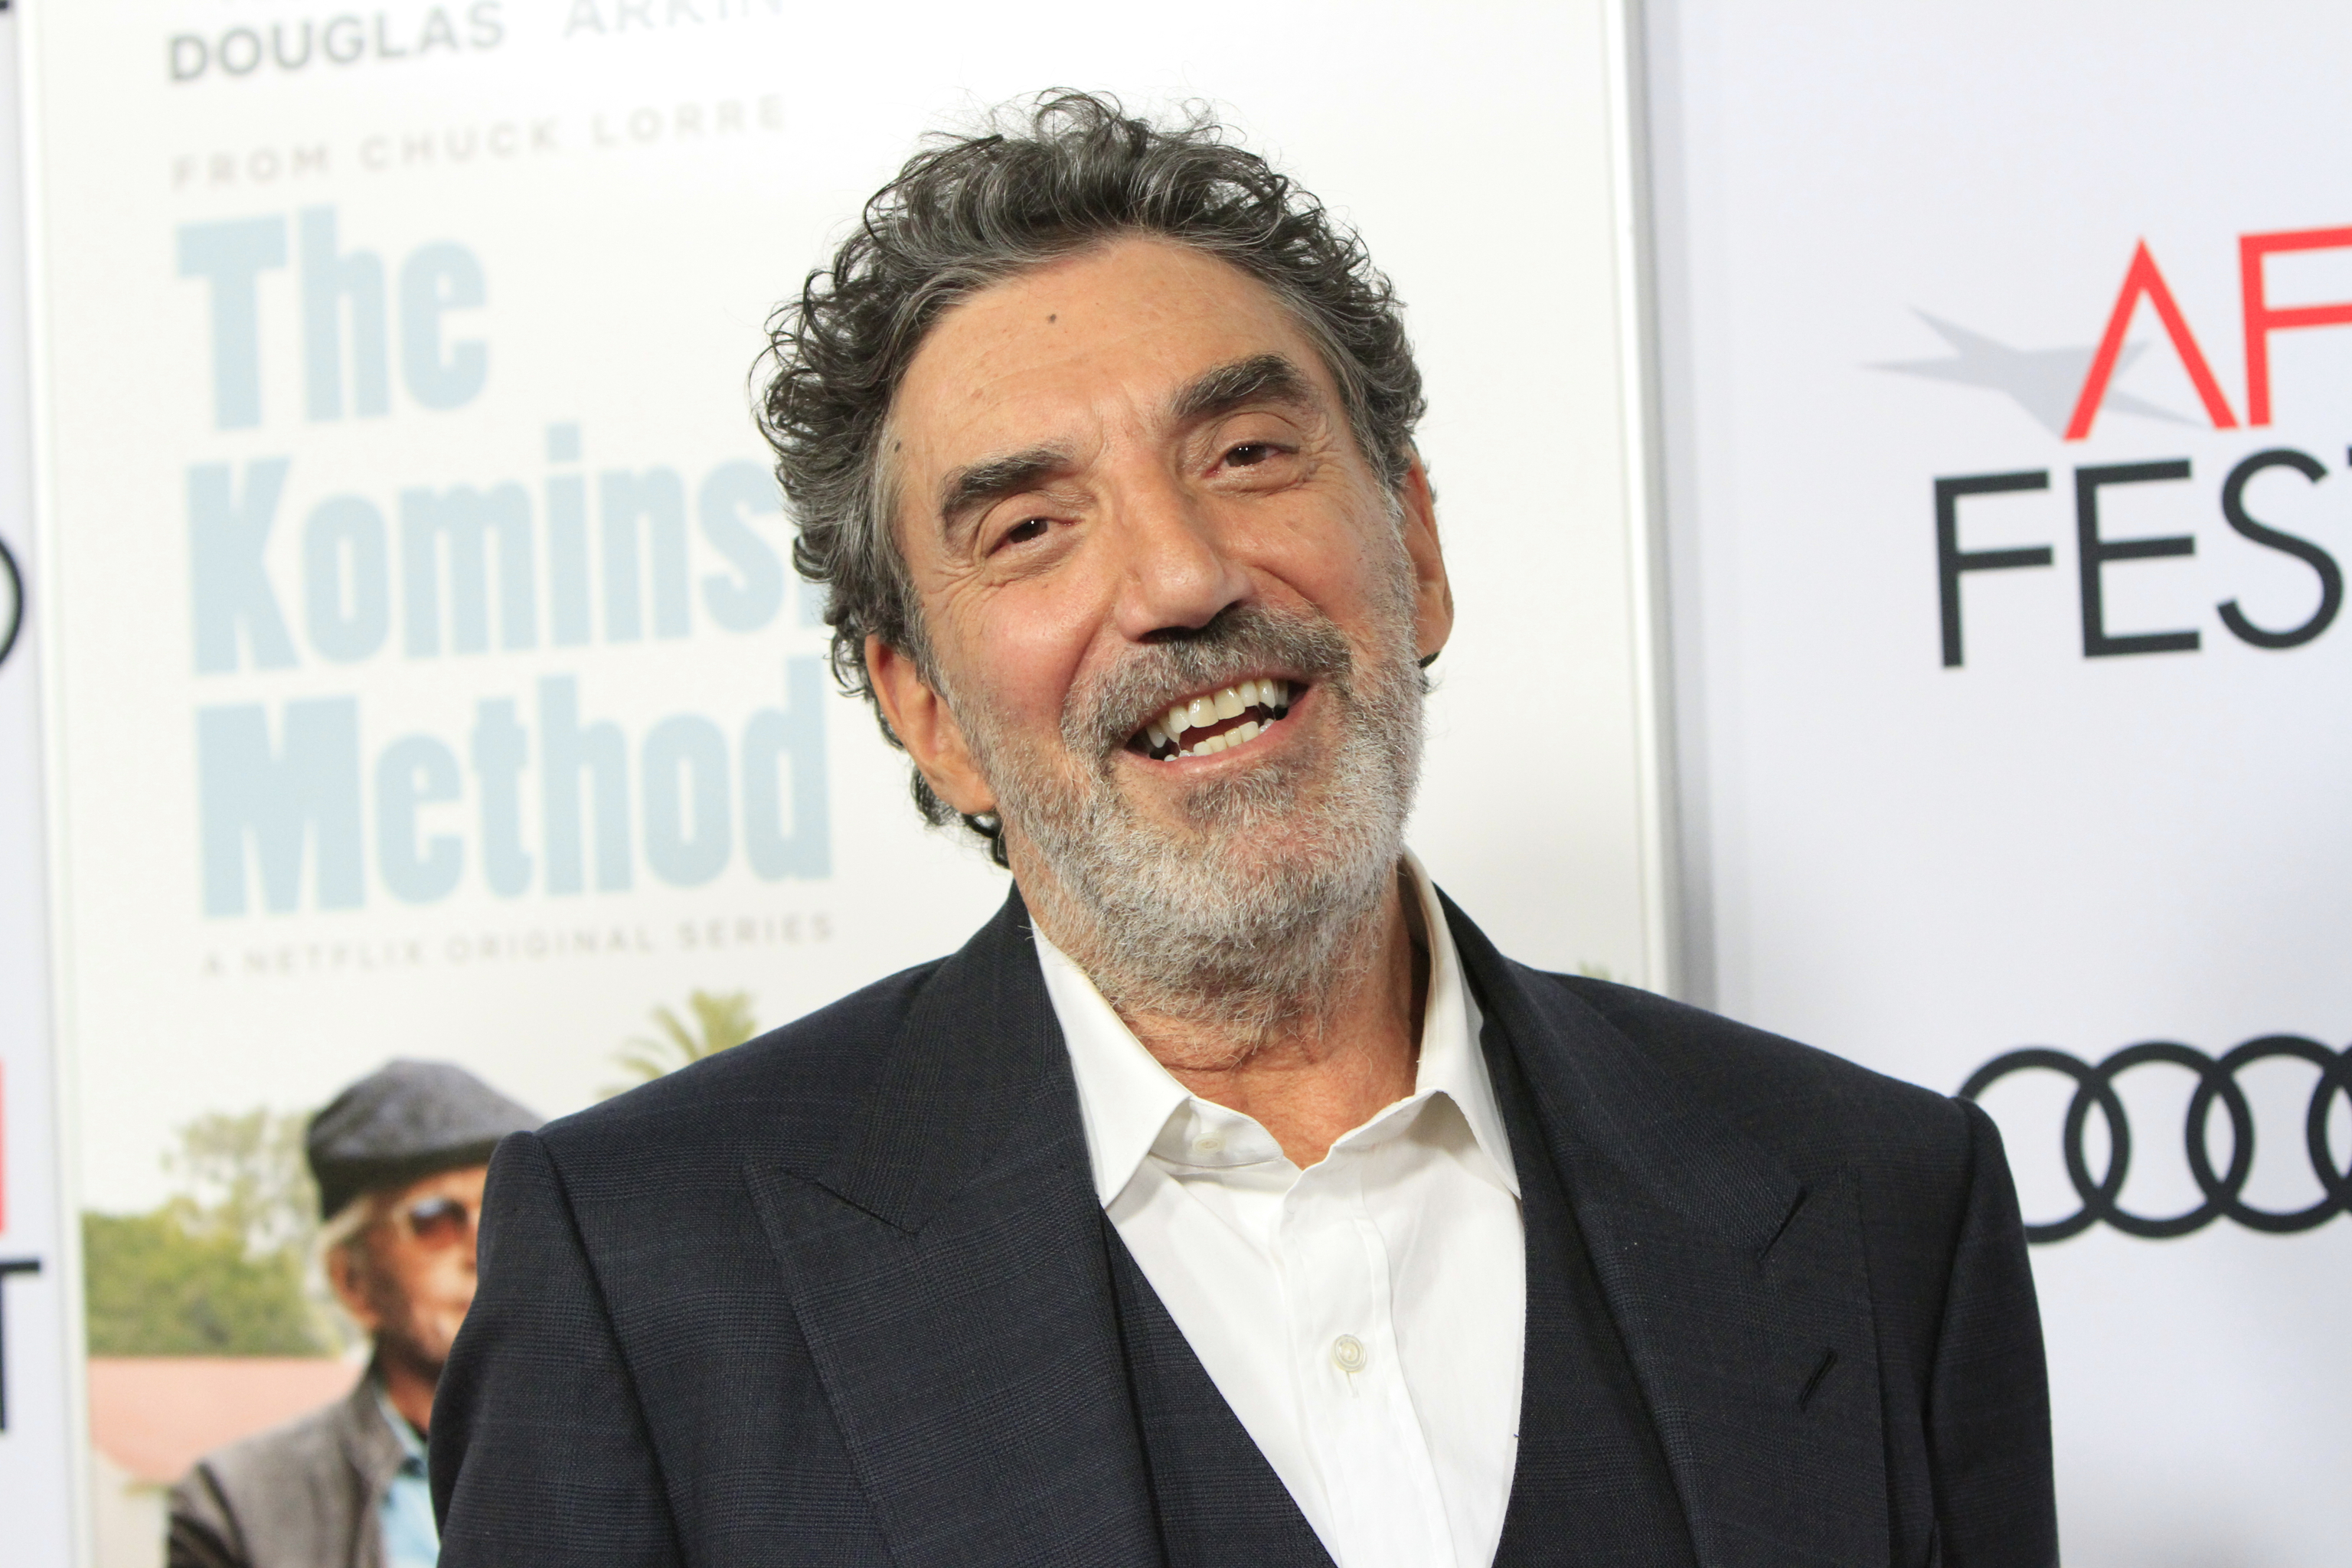 Chuck Lorre at the 2018 AFI Fest in Los Angeles, CA.